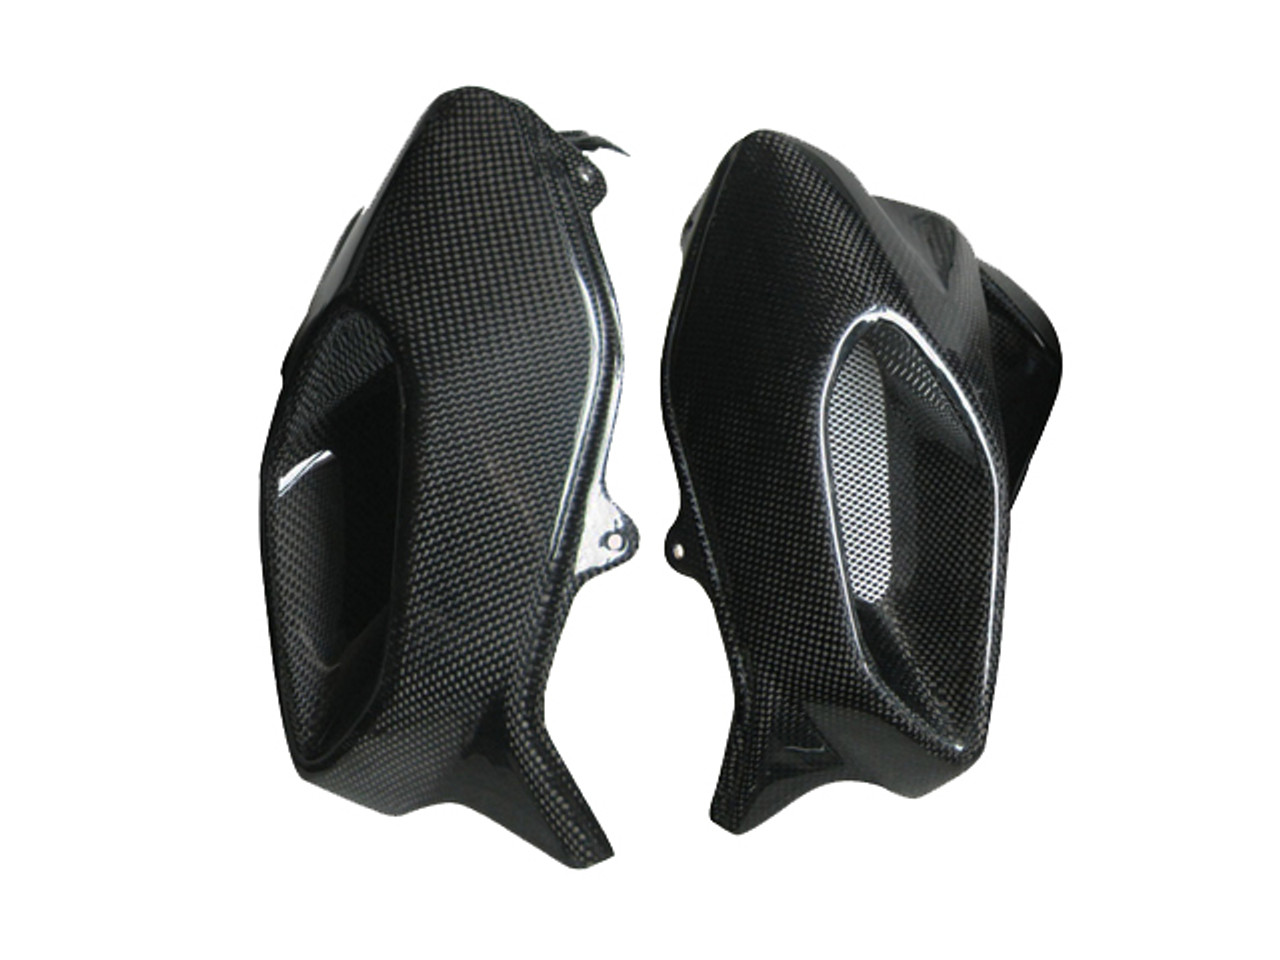 Air Intake Covers for MV Agusta Brutale 920, 990R, 1090RR in Glossy Plain Weave Carbon Fiber Carbon.